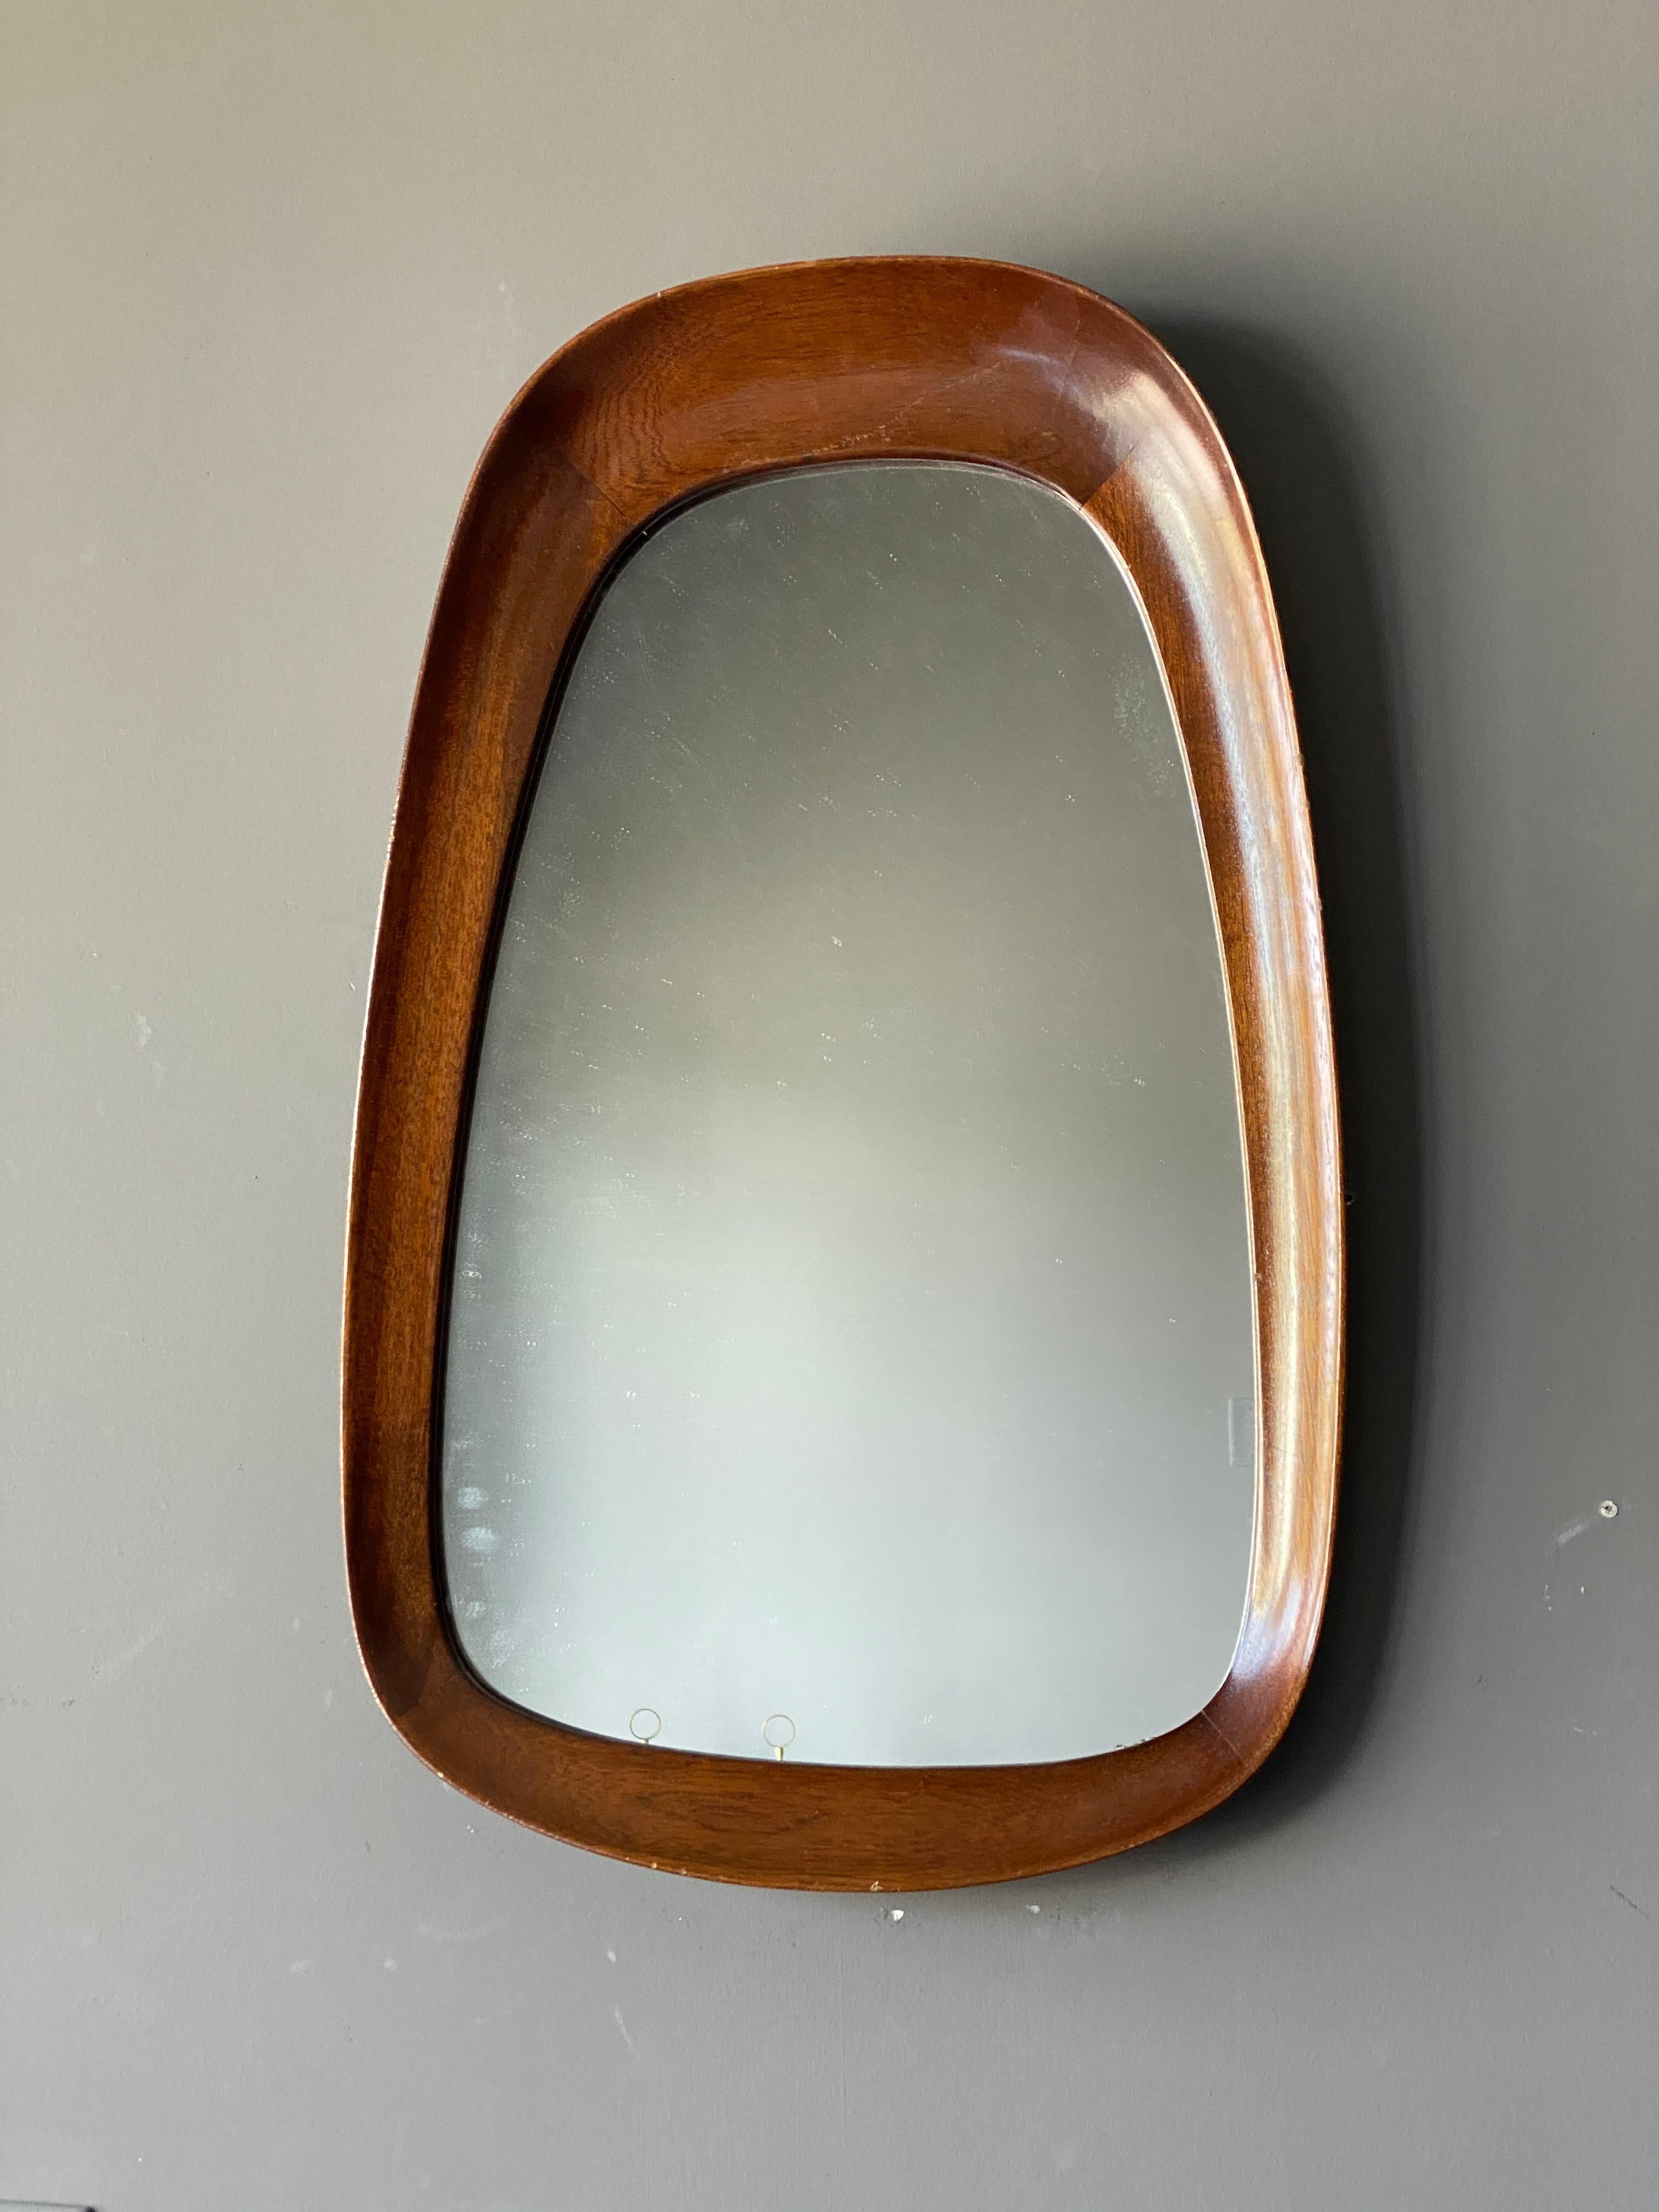 A rare organic wall mirror produced by AB Glas & Trä, Hovmantorp, Sweden. In sculpted teak and crystal mirror glass, labeled. 

Other designers of the period working in the organic style include Fontana Arte, Gio Ponti, and Paolo Buffa.